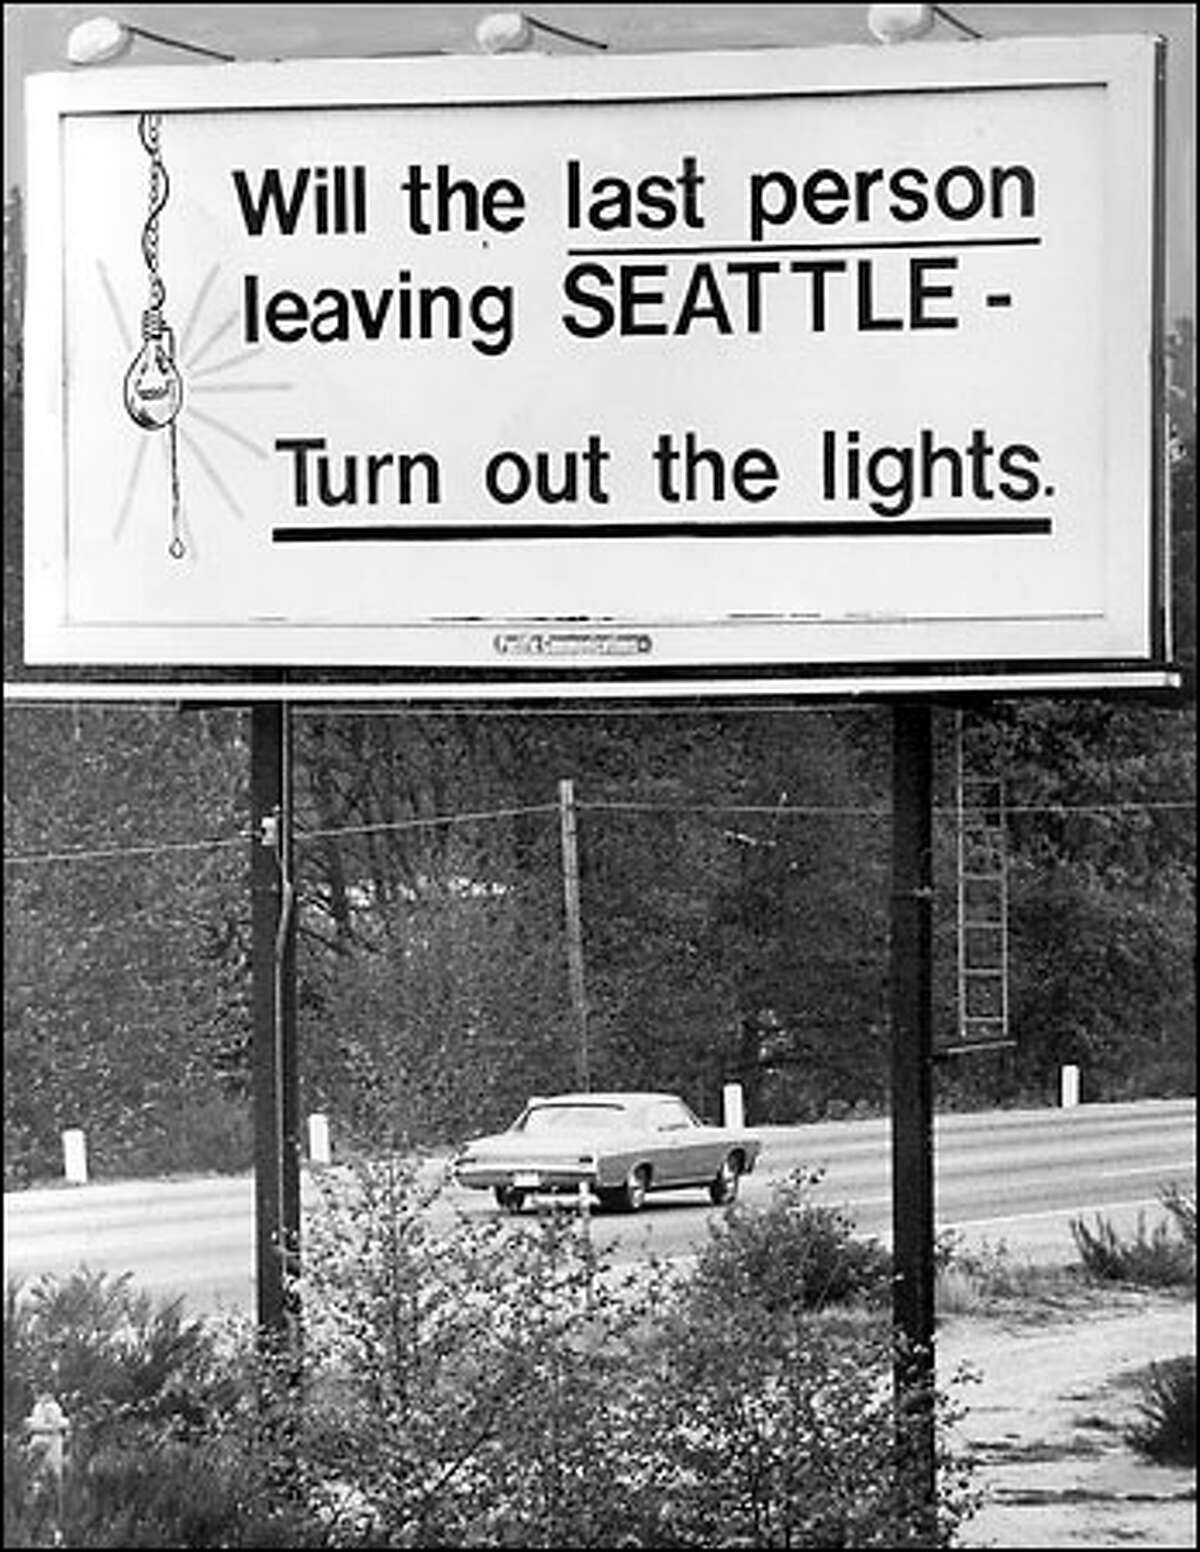 A famous billboard expressed the company's -- and the city's -- plight in April 1971. During the Boeing Bust of 1971, the company furloughed about 40,000 workers.